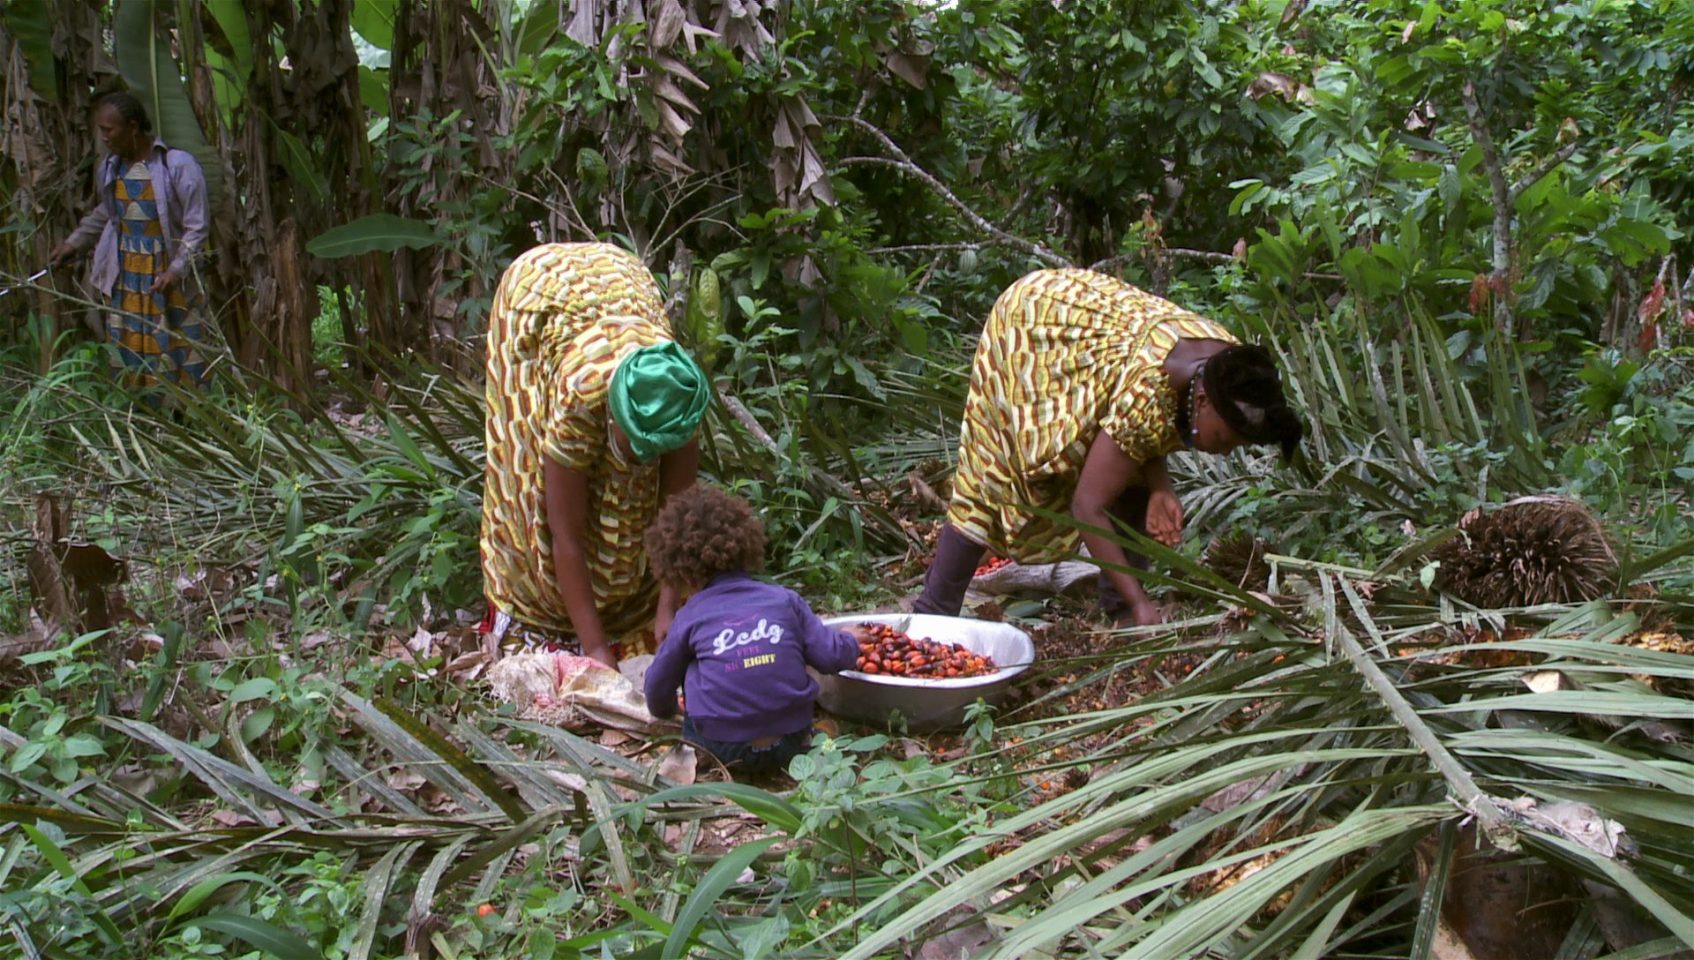 Two people gather fruit with a small child helping